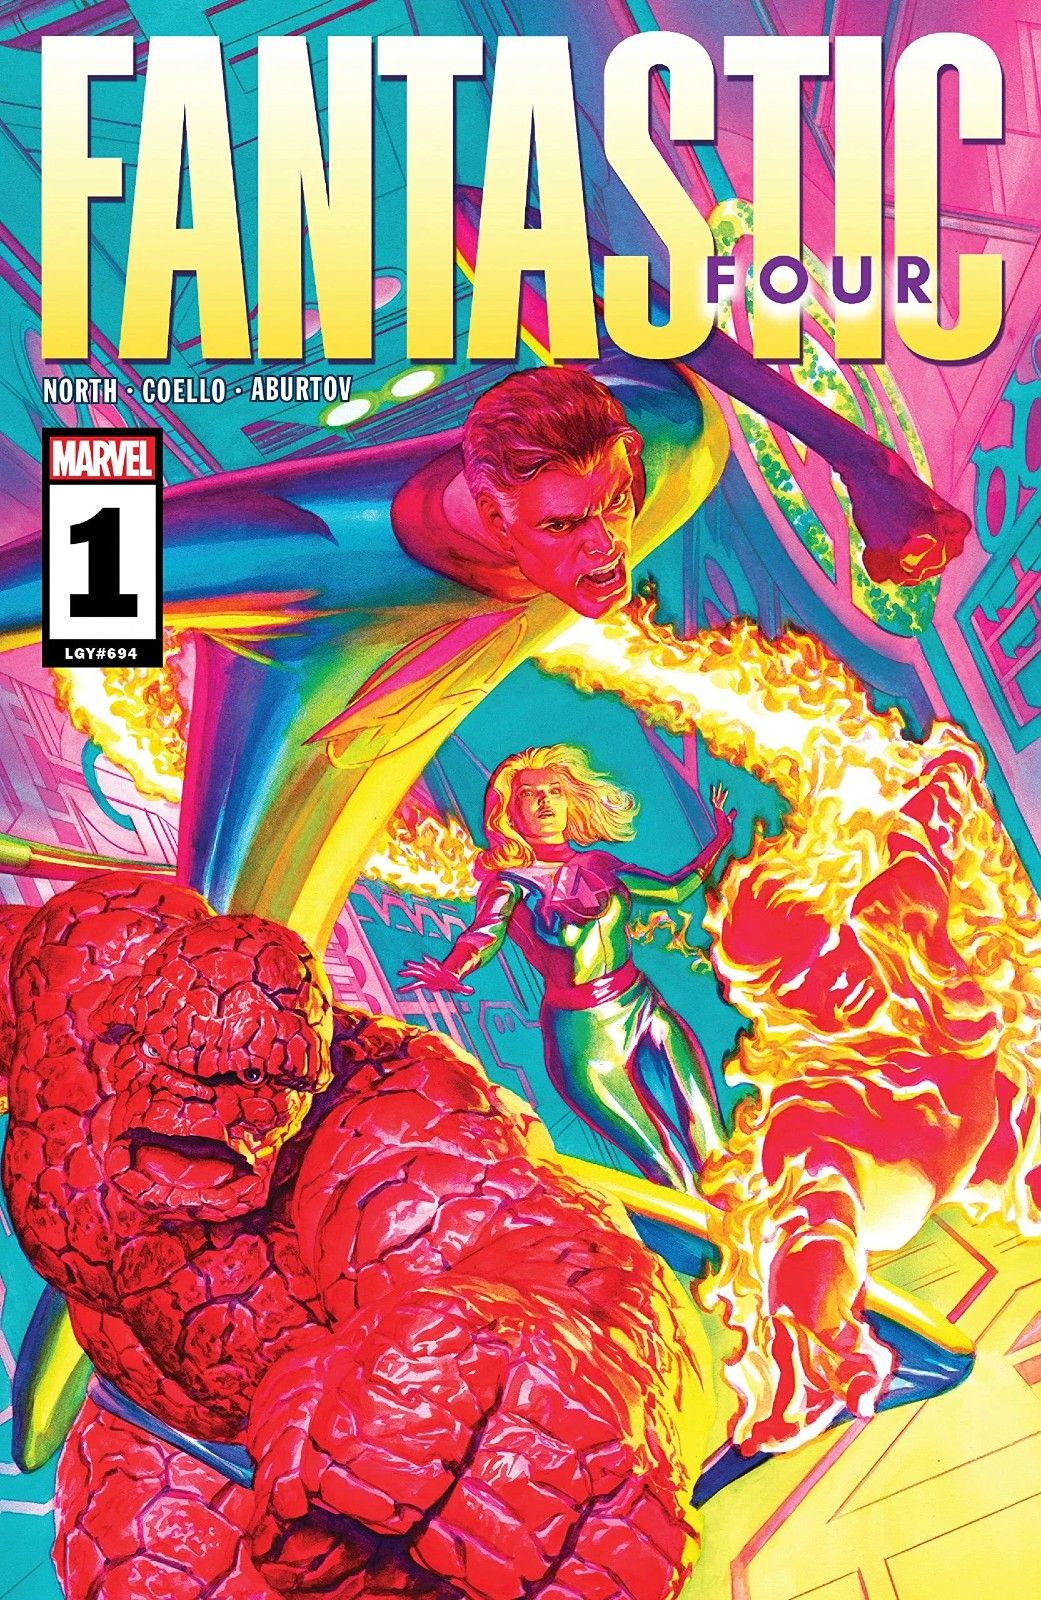 Mister Fantastic, Human Torch, Invisible Women, and The Thing in Fantastic Four (Vol. 7) #1 by Marvel